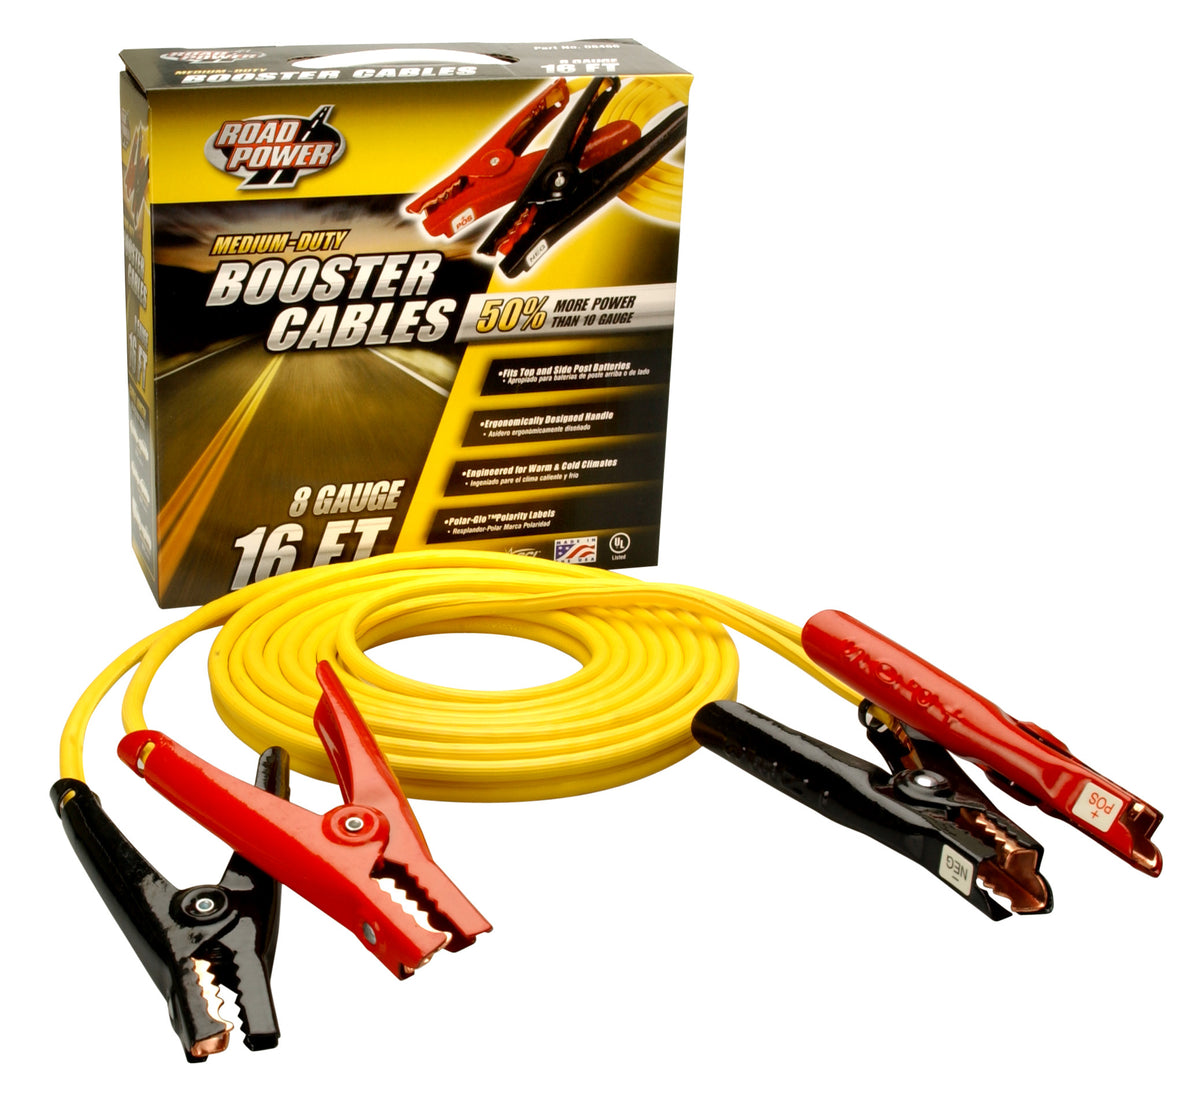 Road Power 08466-00-02 8-Gauge Booster Cable, 16&#039;